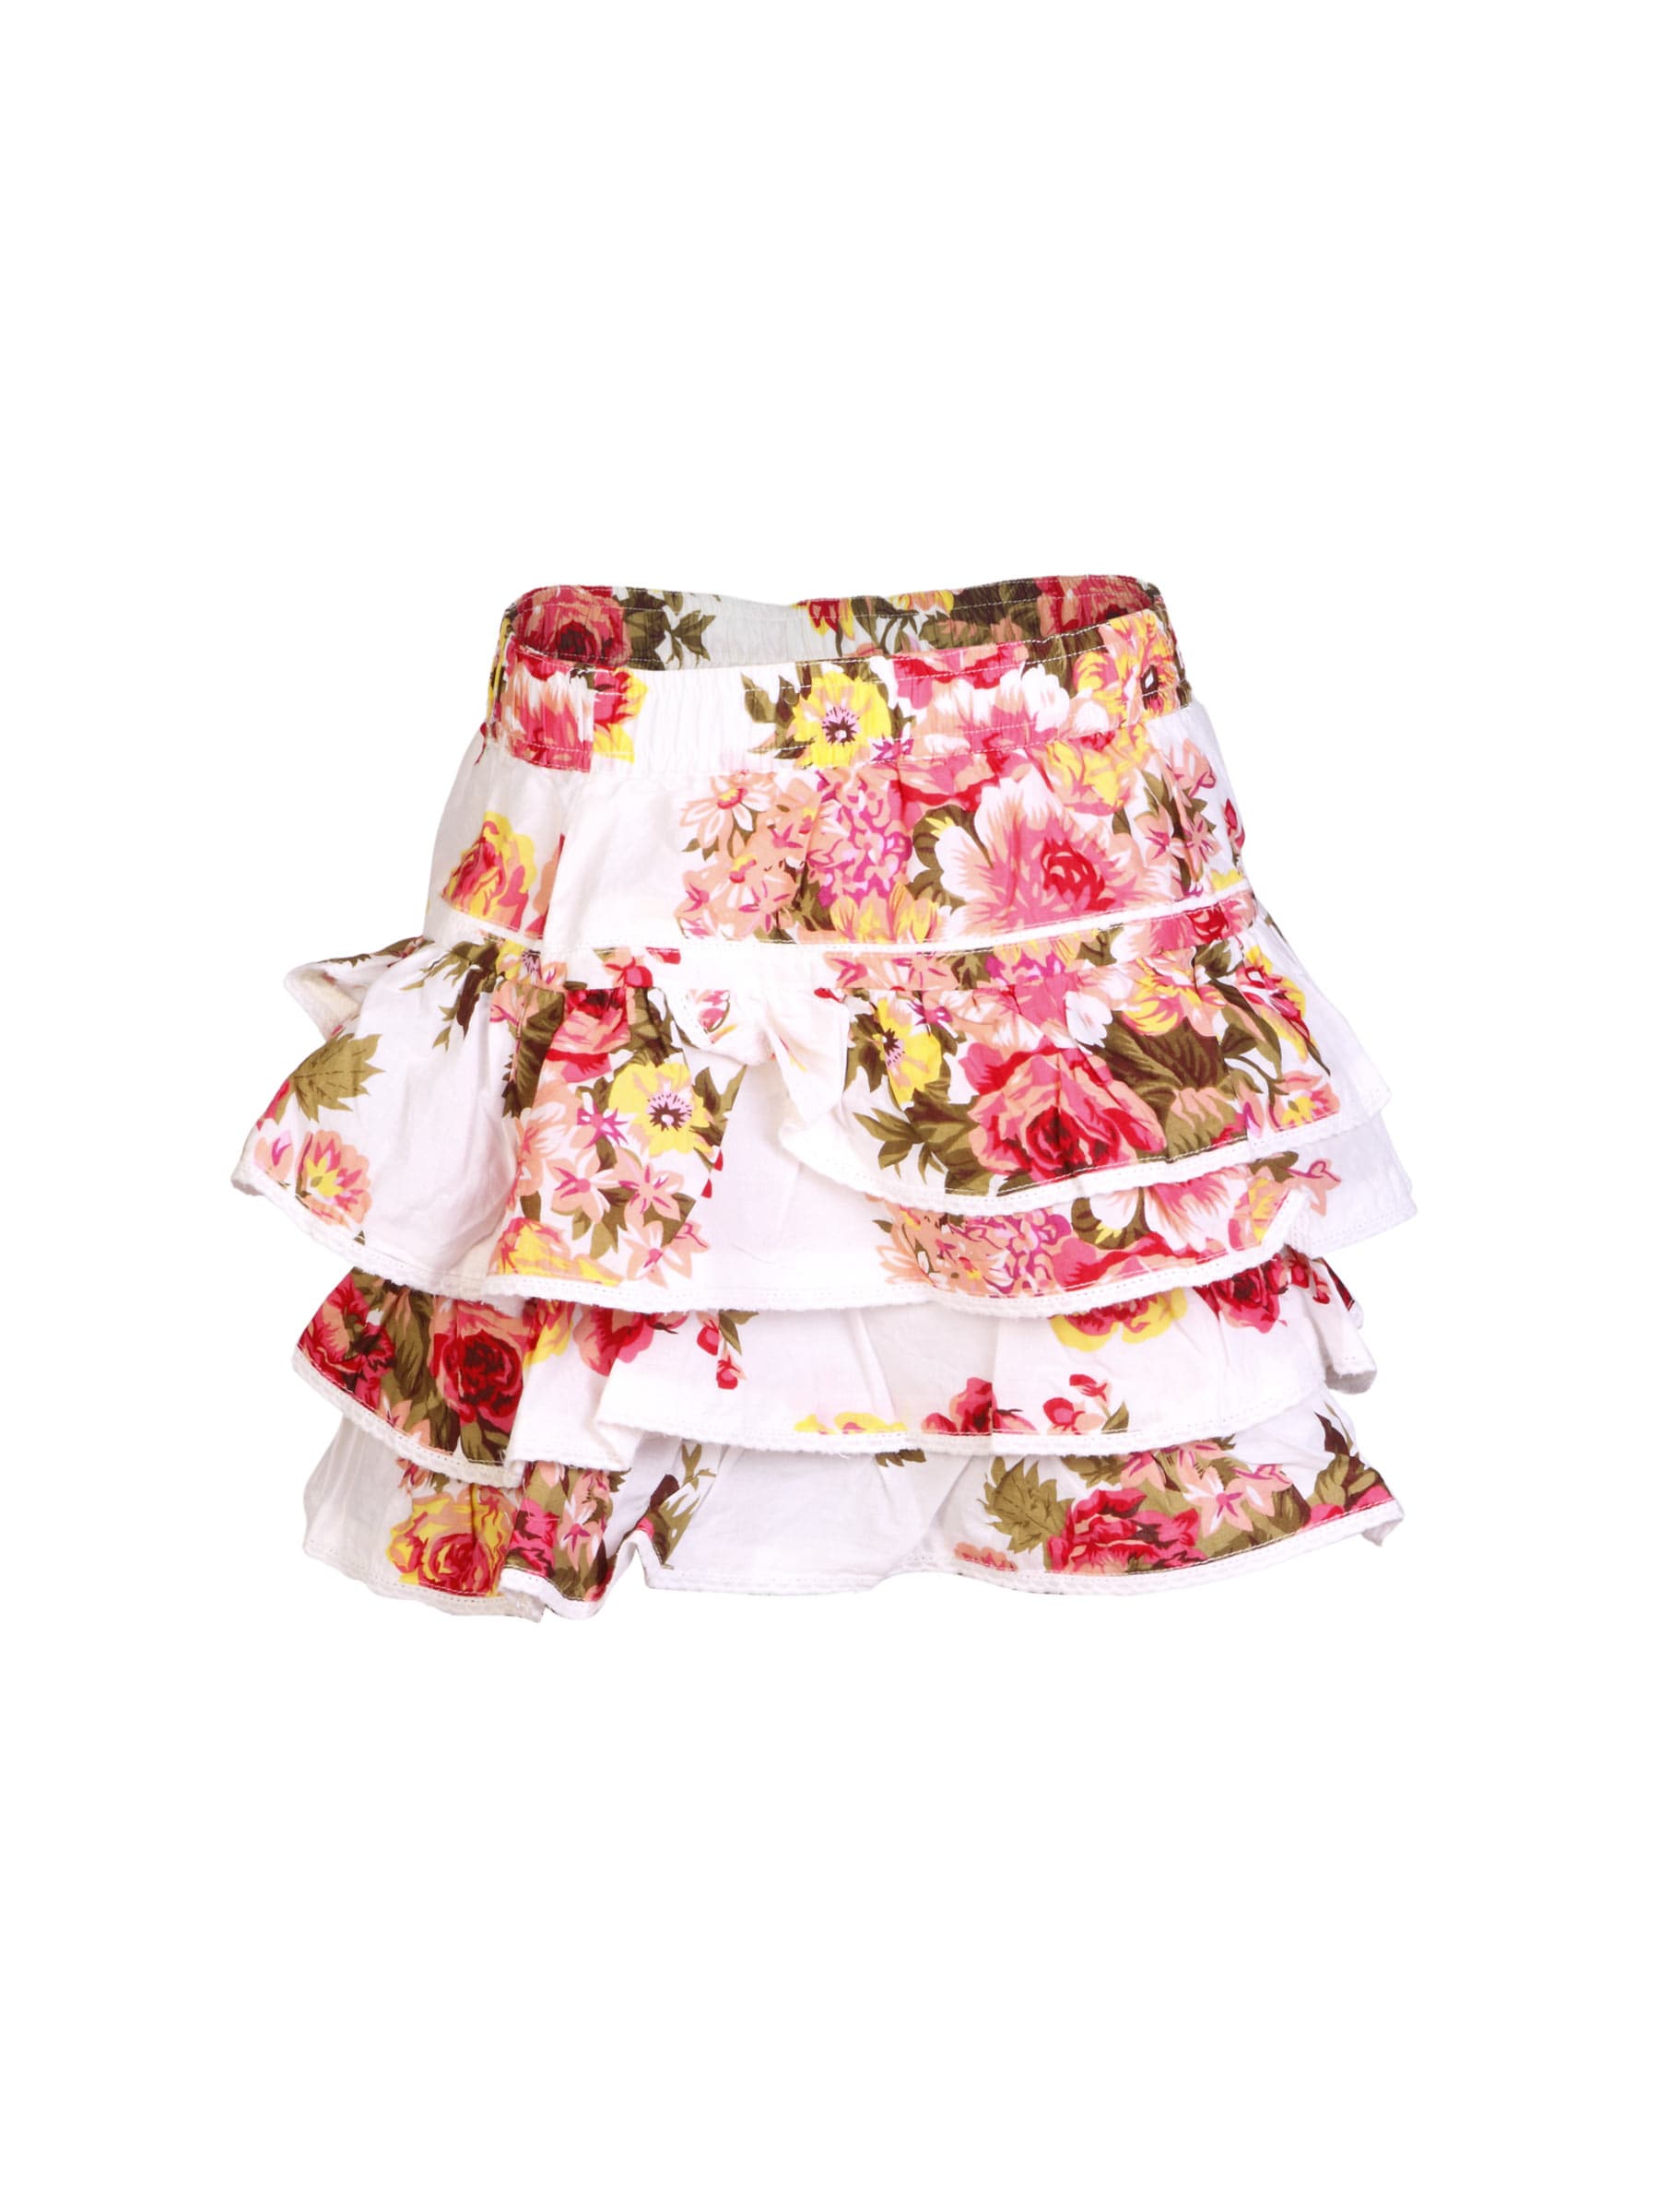 United Colors of Benetton Kids Girls Printed Pink Skirt